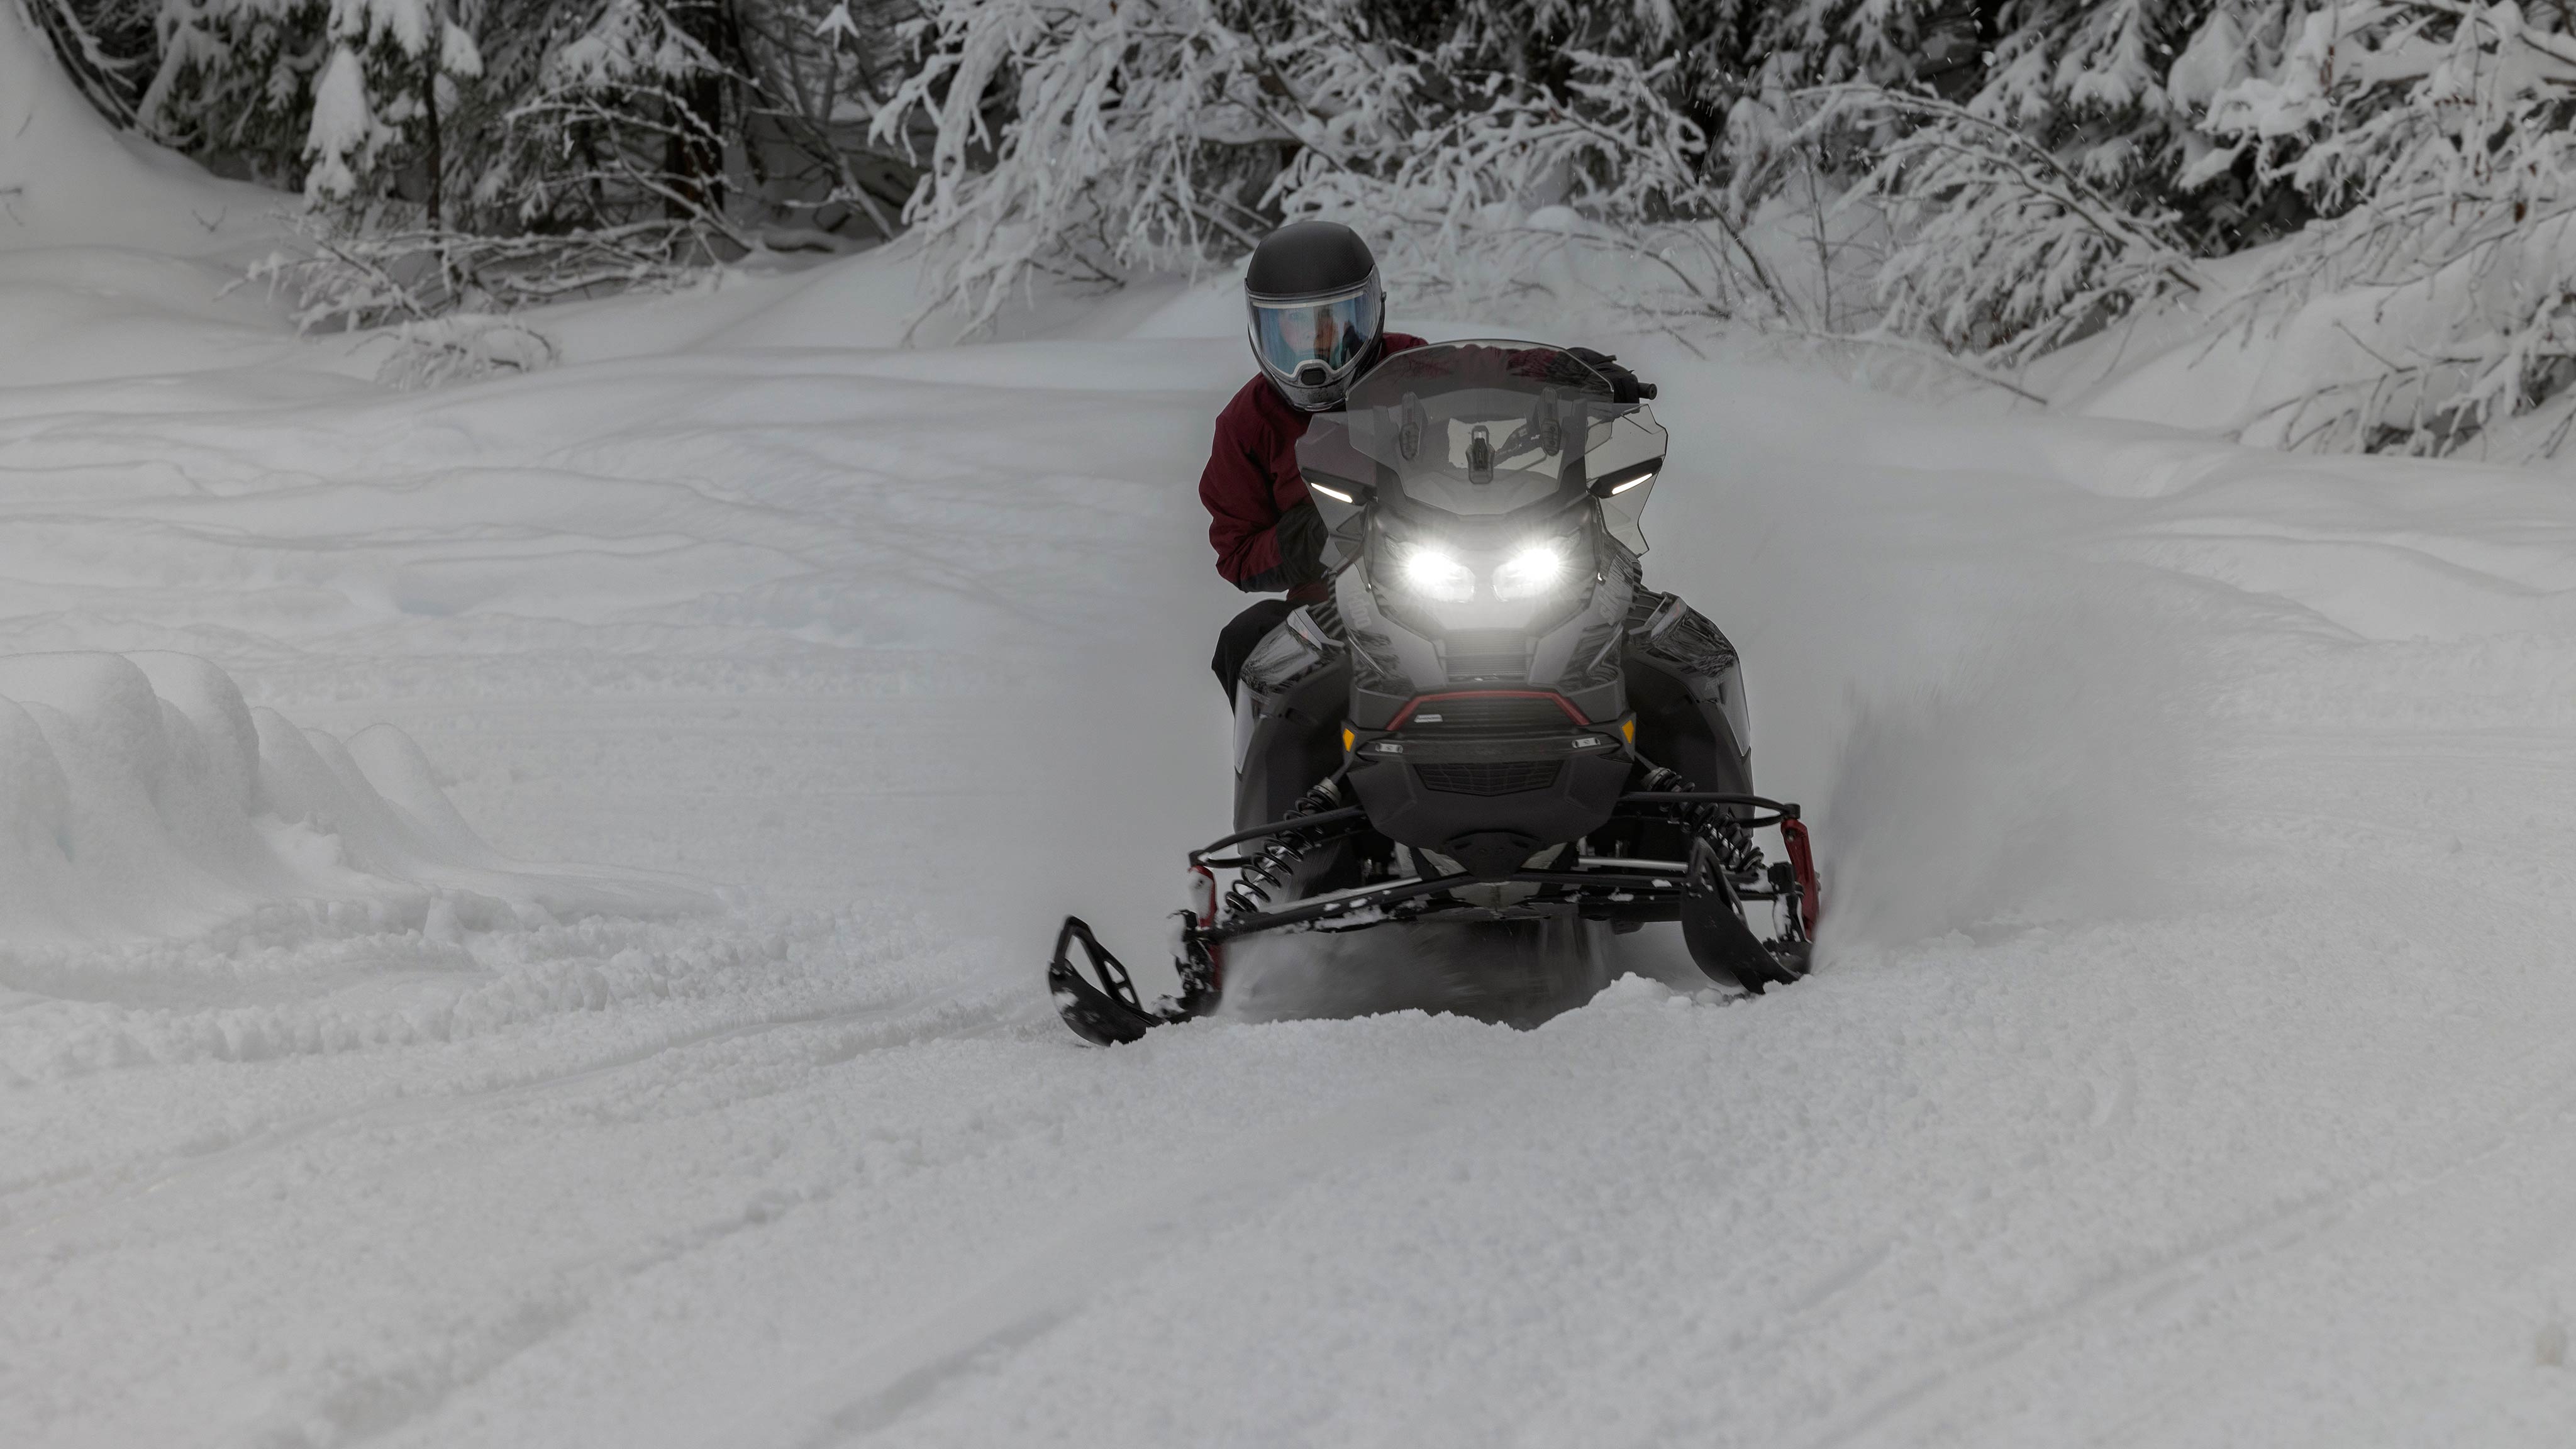 Rider carefully navigating a snowy trail on a 2025 Ski-Doo Renegade